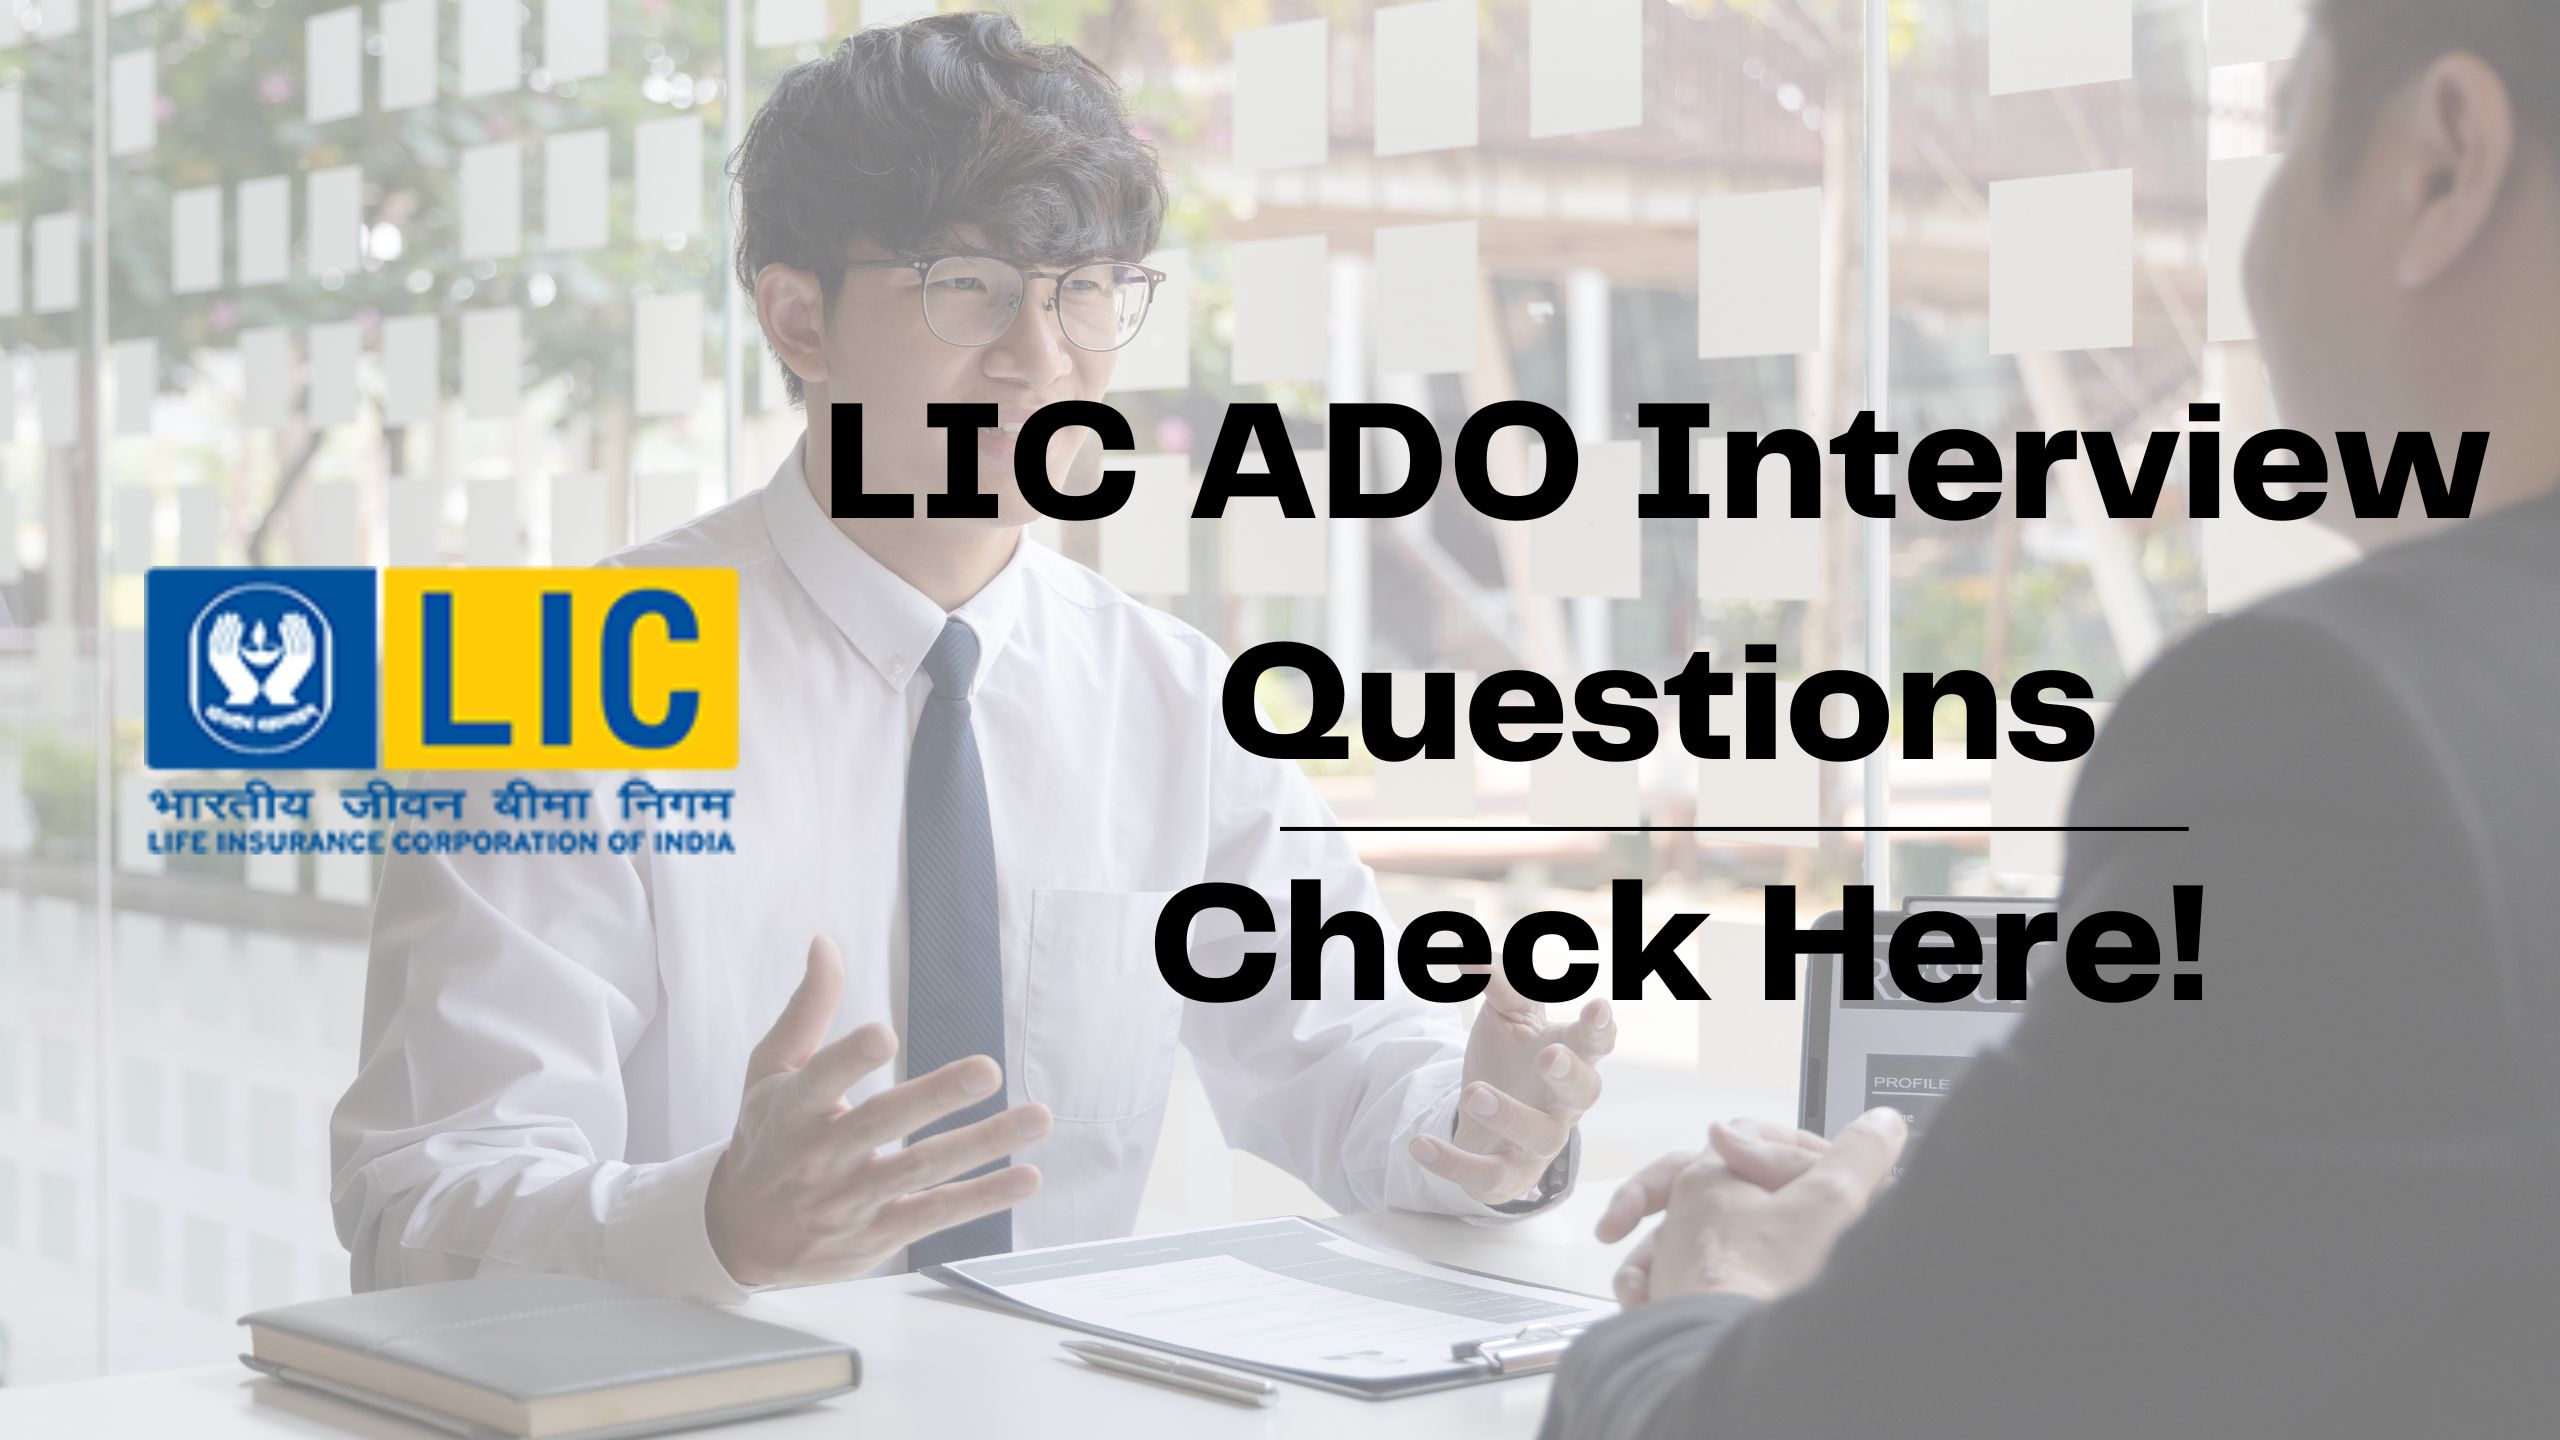 LIC ADO Interview Questions, Check Here!